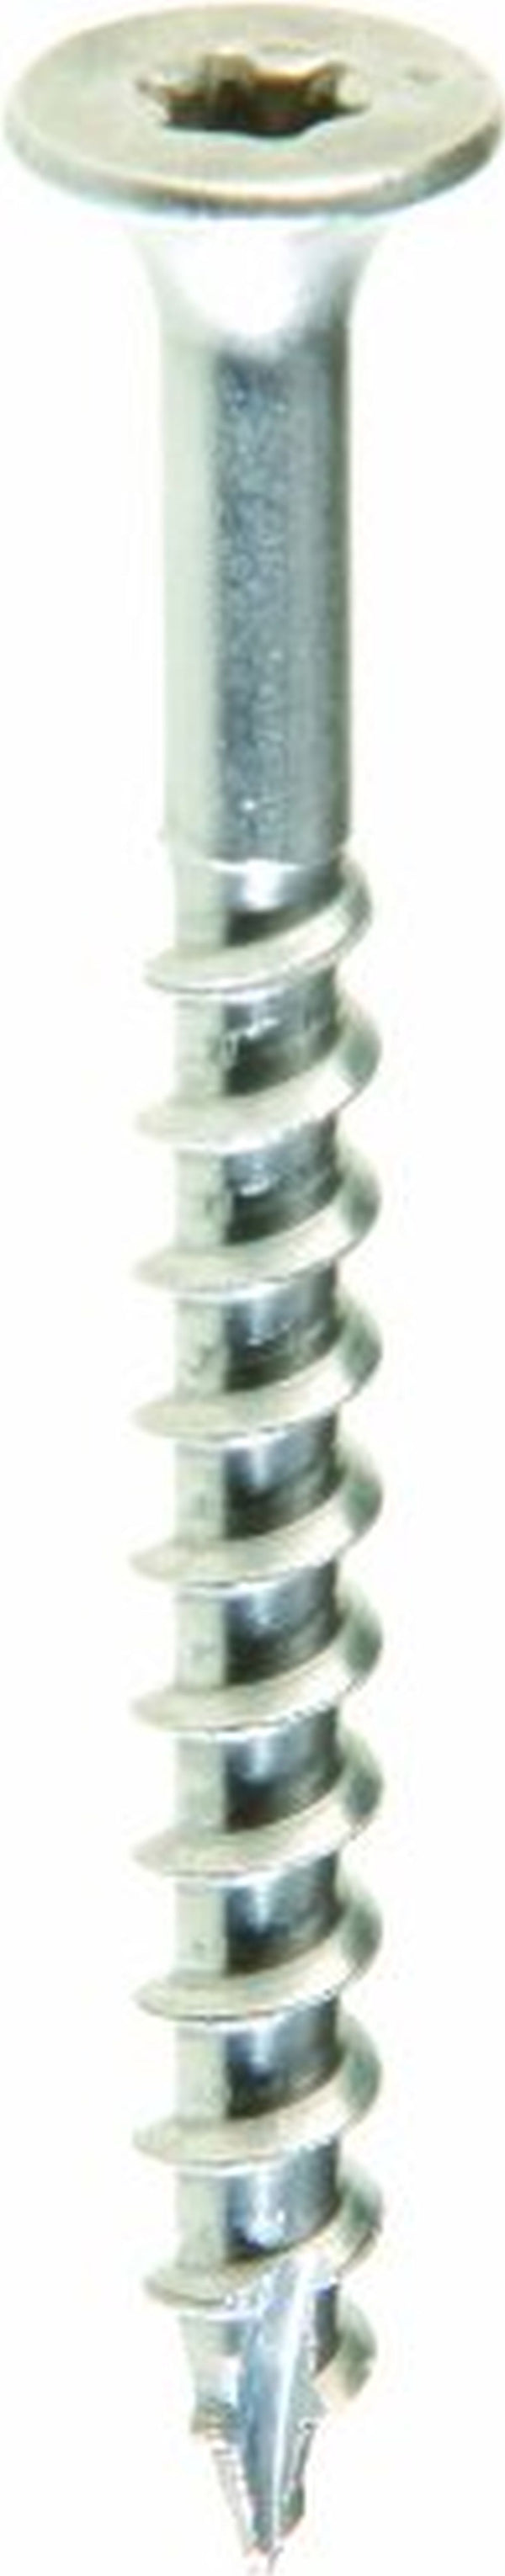 Grip Rite MAXS21210DS3051 #10 x 2-1/2 in. 305 Stainless Steel Deck Screw (1 lb.Pack)